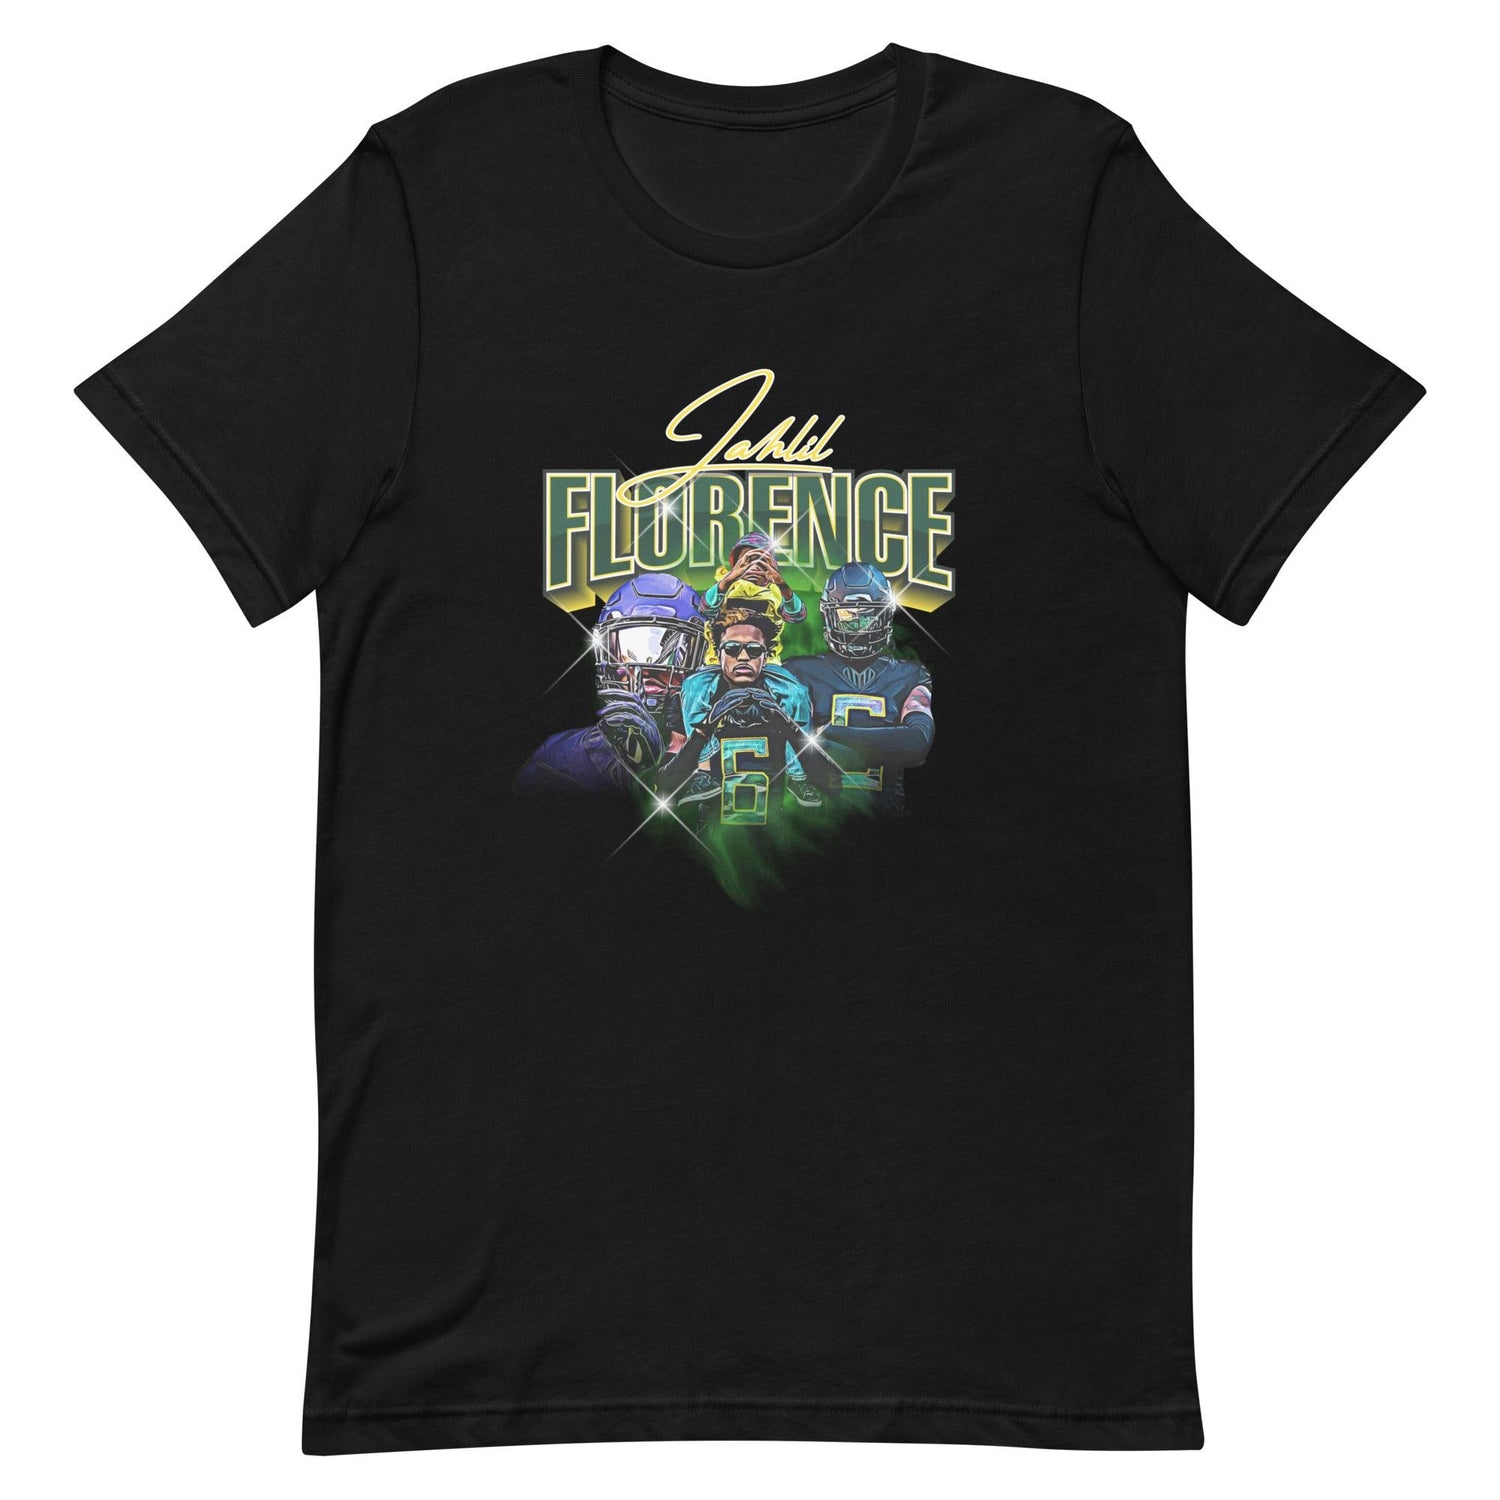 Jahlil Florence “Heritage” t-shirt - Fan Arch